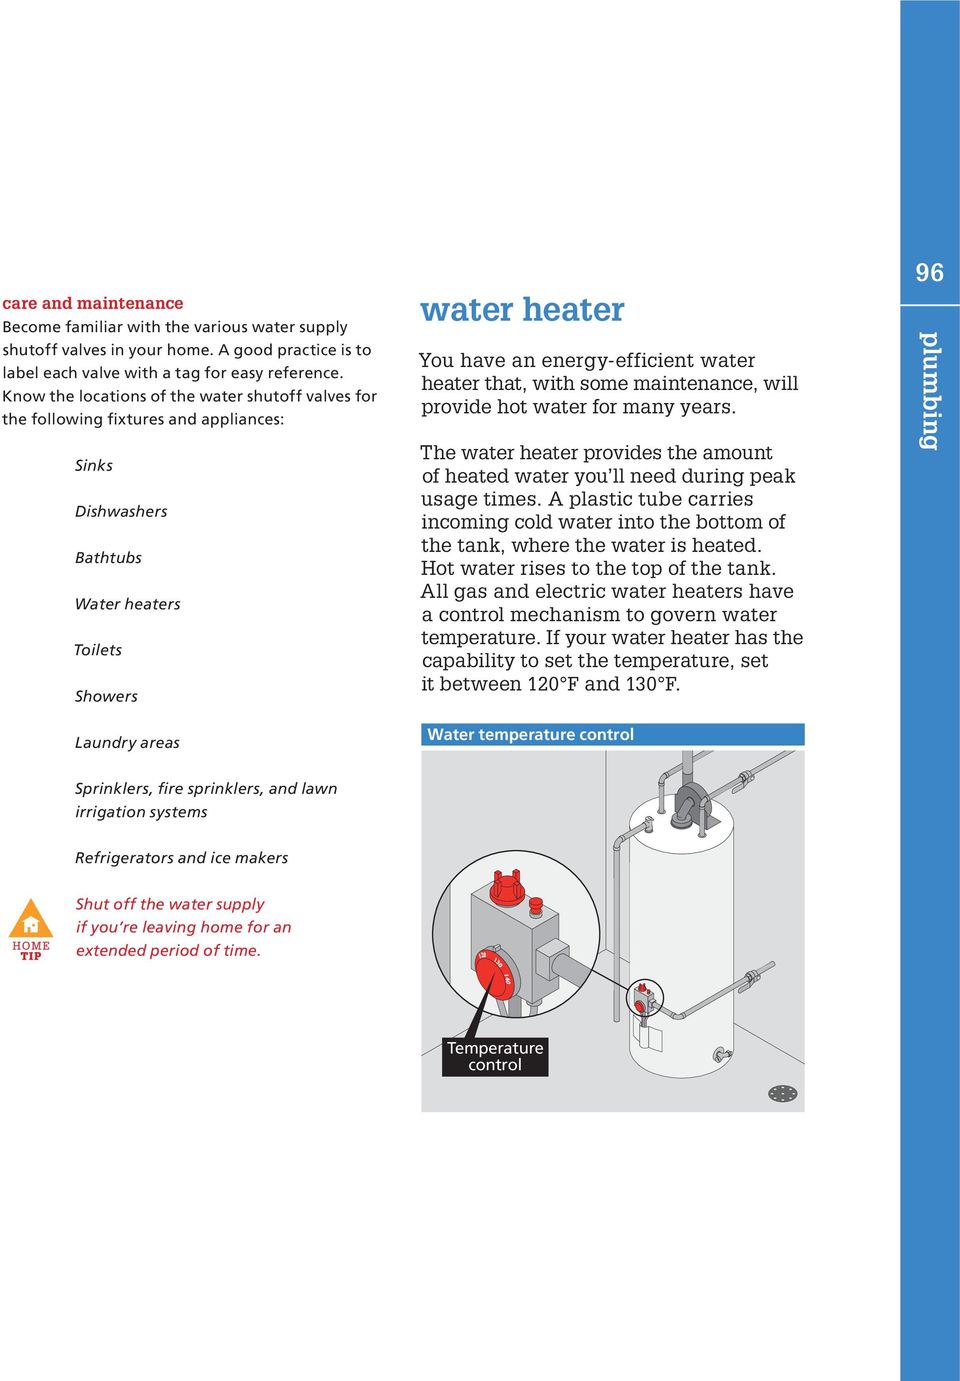 energy-efficient water heater that, with some maintenance, will provide hot water for many years. The water heater provides the amount of heated water you ll need during peak usage times.